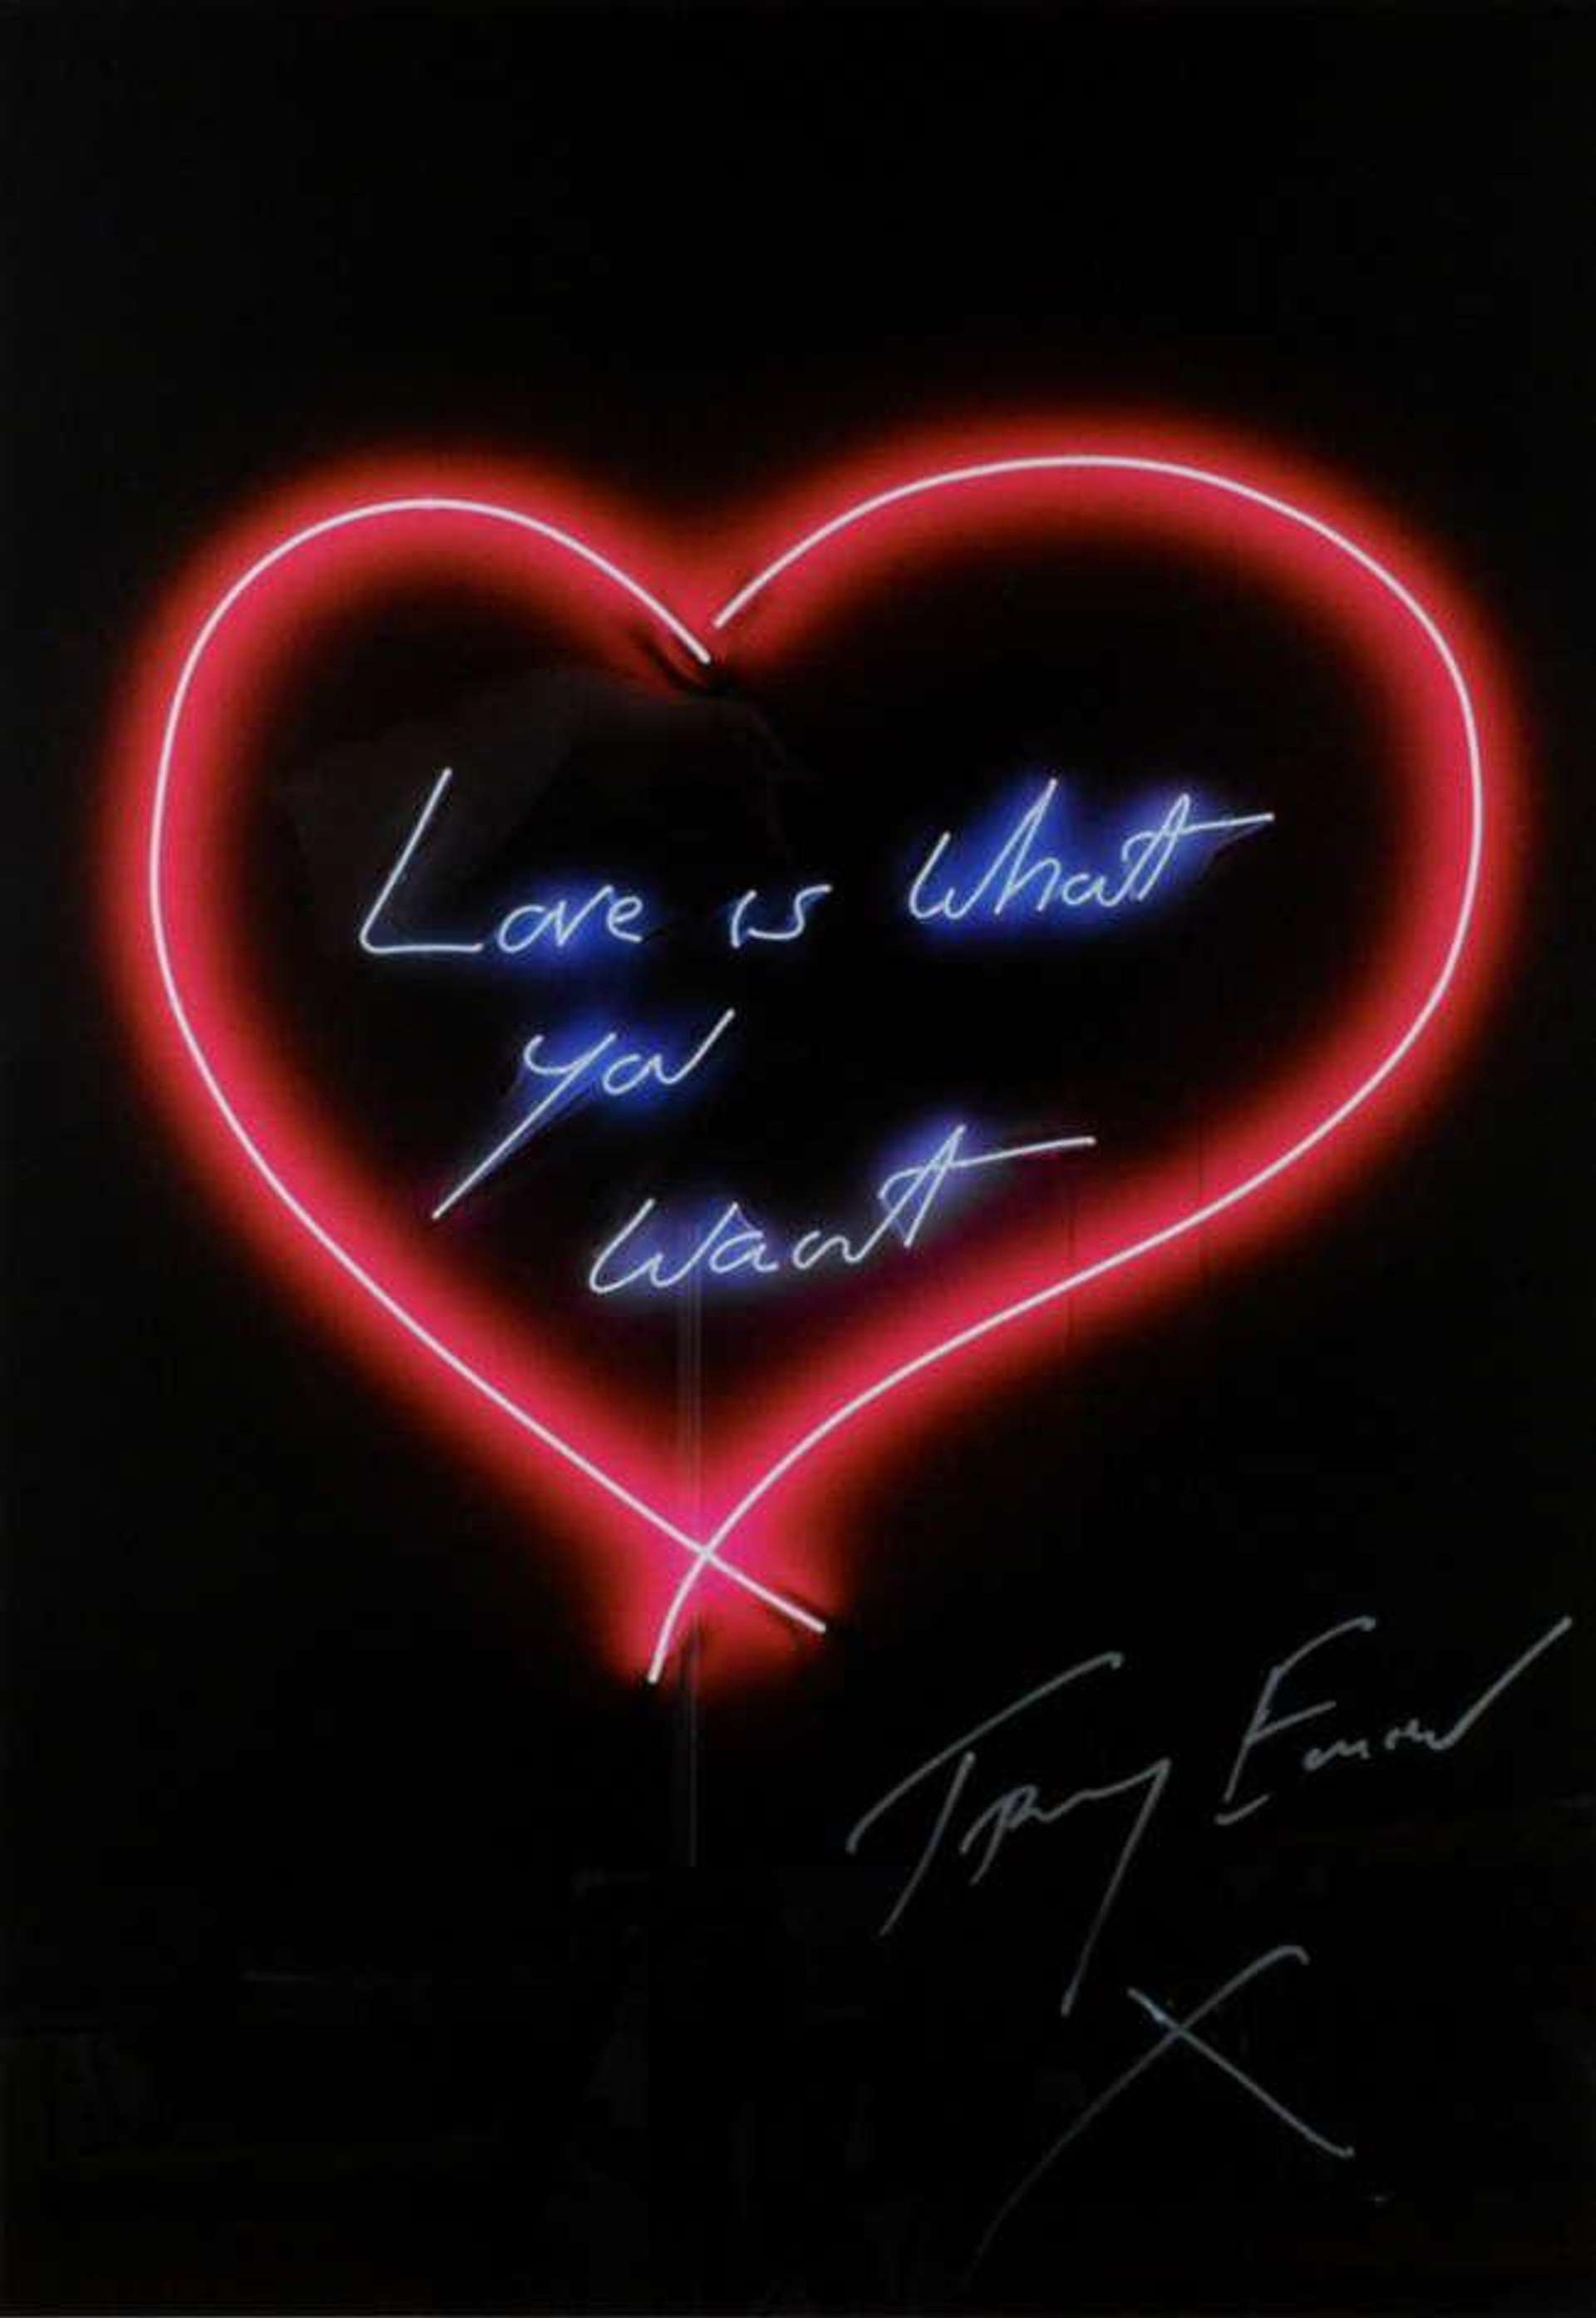 Lithograph by Tracey Emin depicting one of her neon artworks. The artwork shows Emin’s own handwriting, which reads “Iove is what you want”, encircled by a bright neon heart.